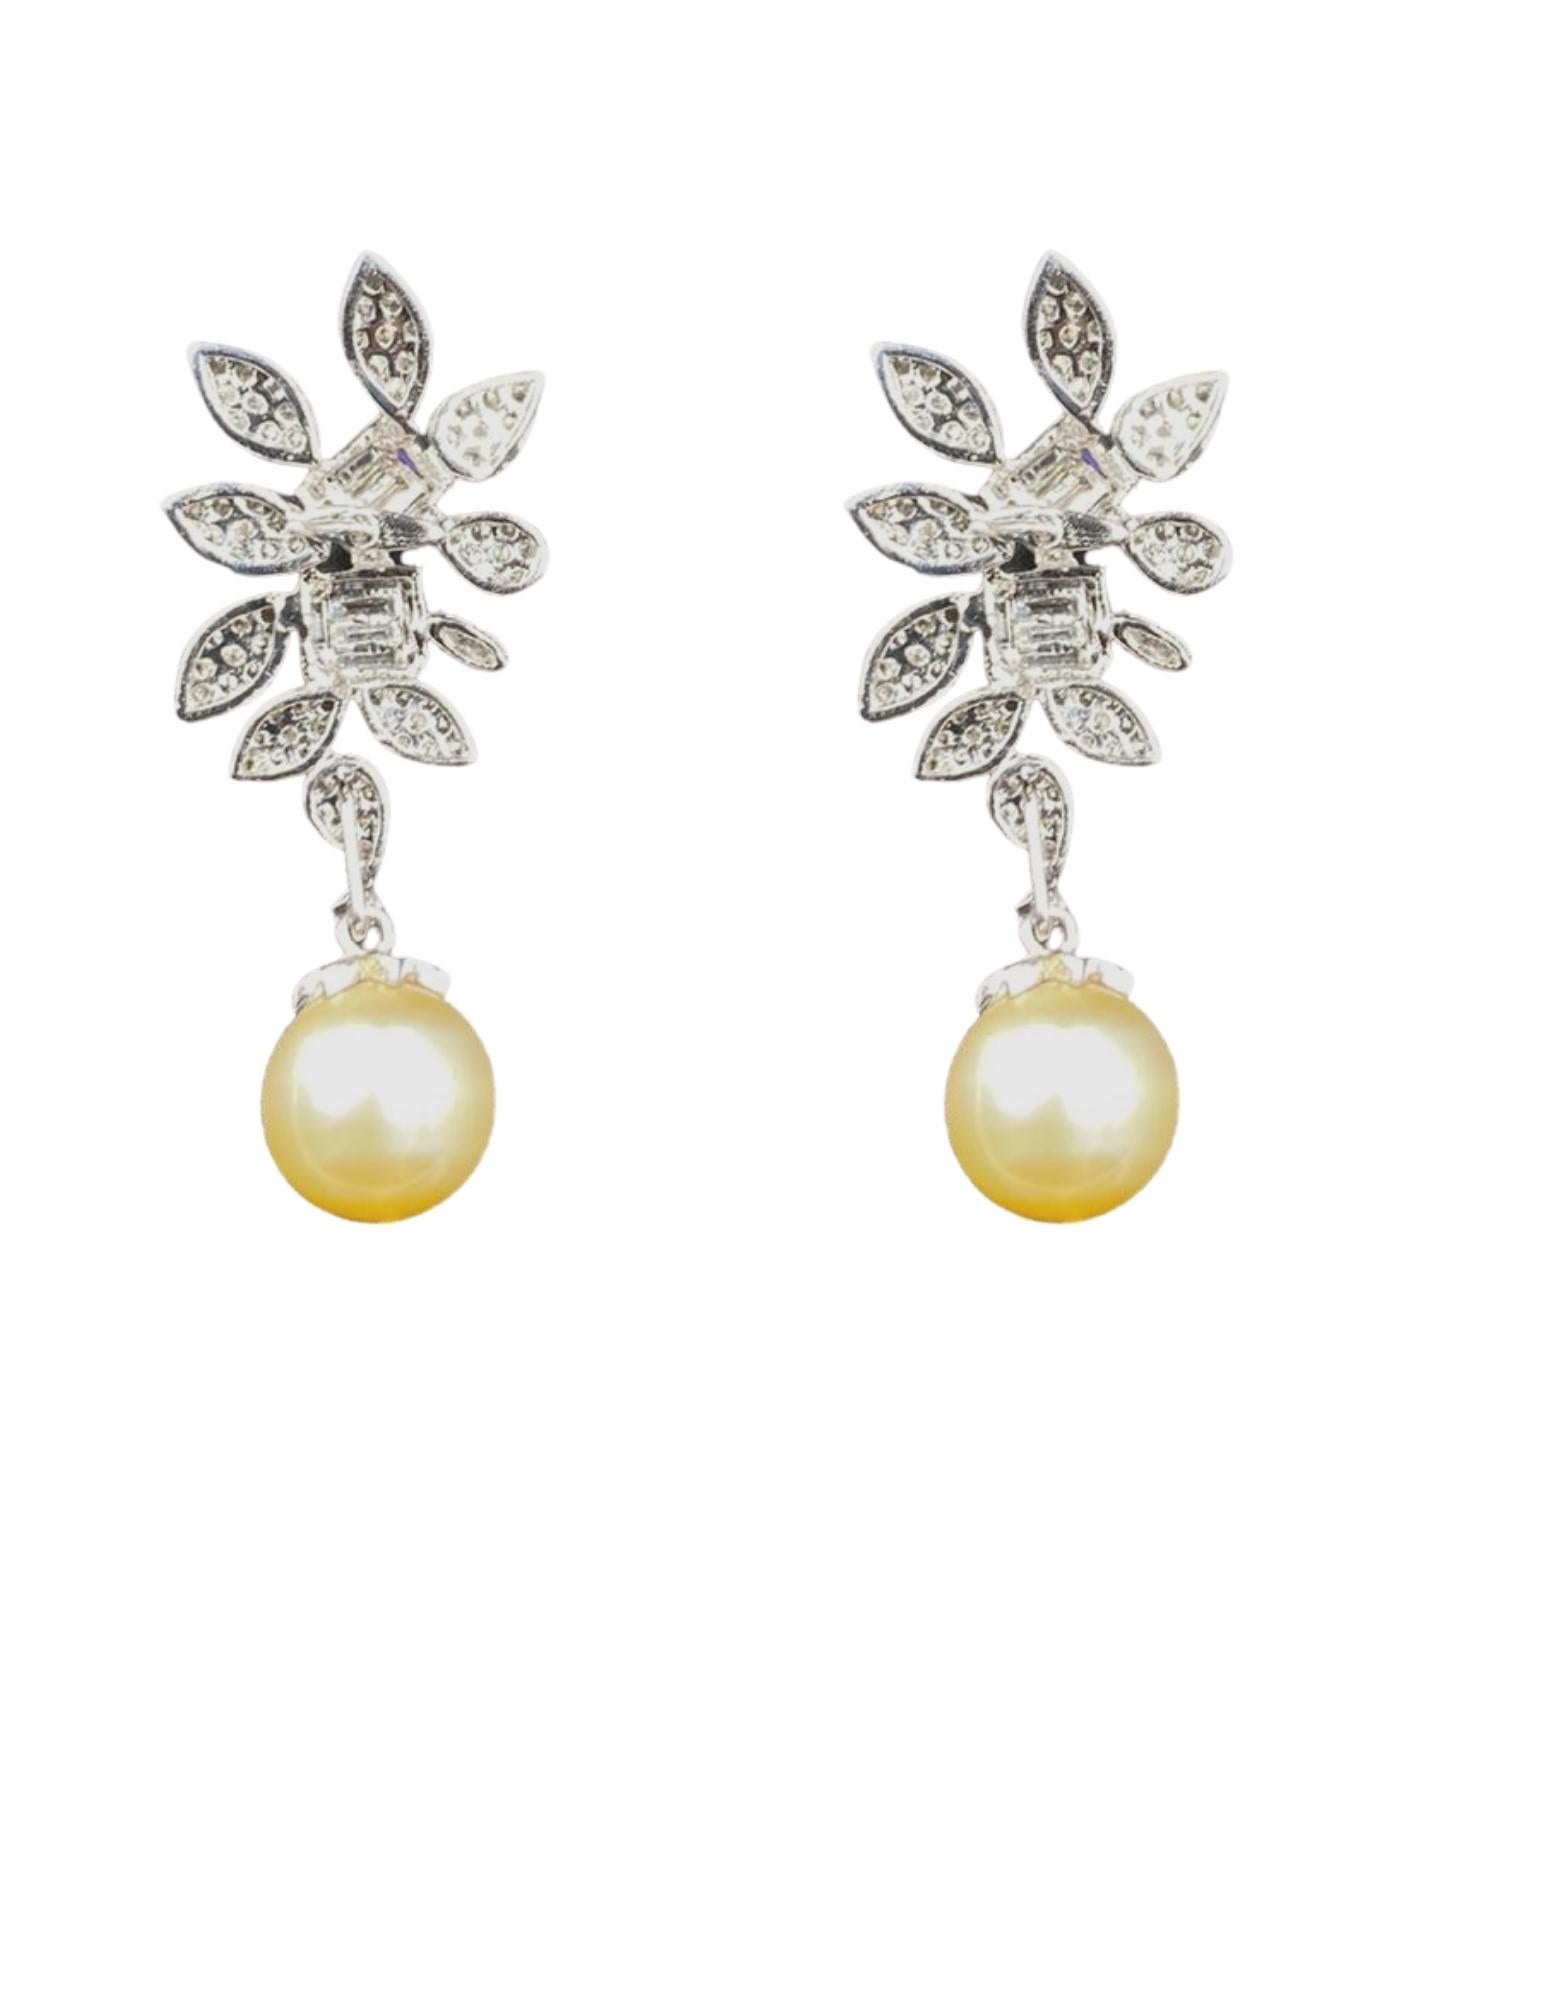 The Eleanor earring features a pair of South Sea Pearls, dropped from timeless diamond baguette earring, made in 18K white gold.


South Sea Cultured Pearl
Shape	Drop
Color	Cream
Quality	Fine
Weight	17.5 carats
 	 
Diamond Details
Shape	Round